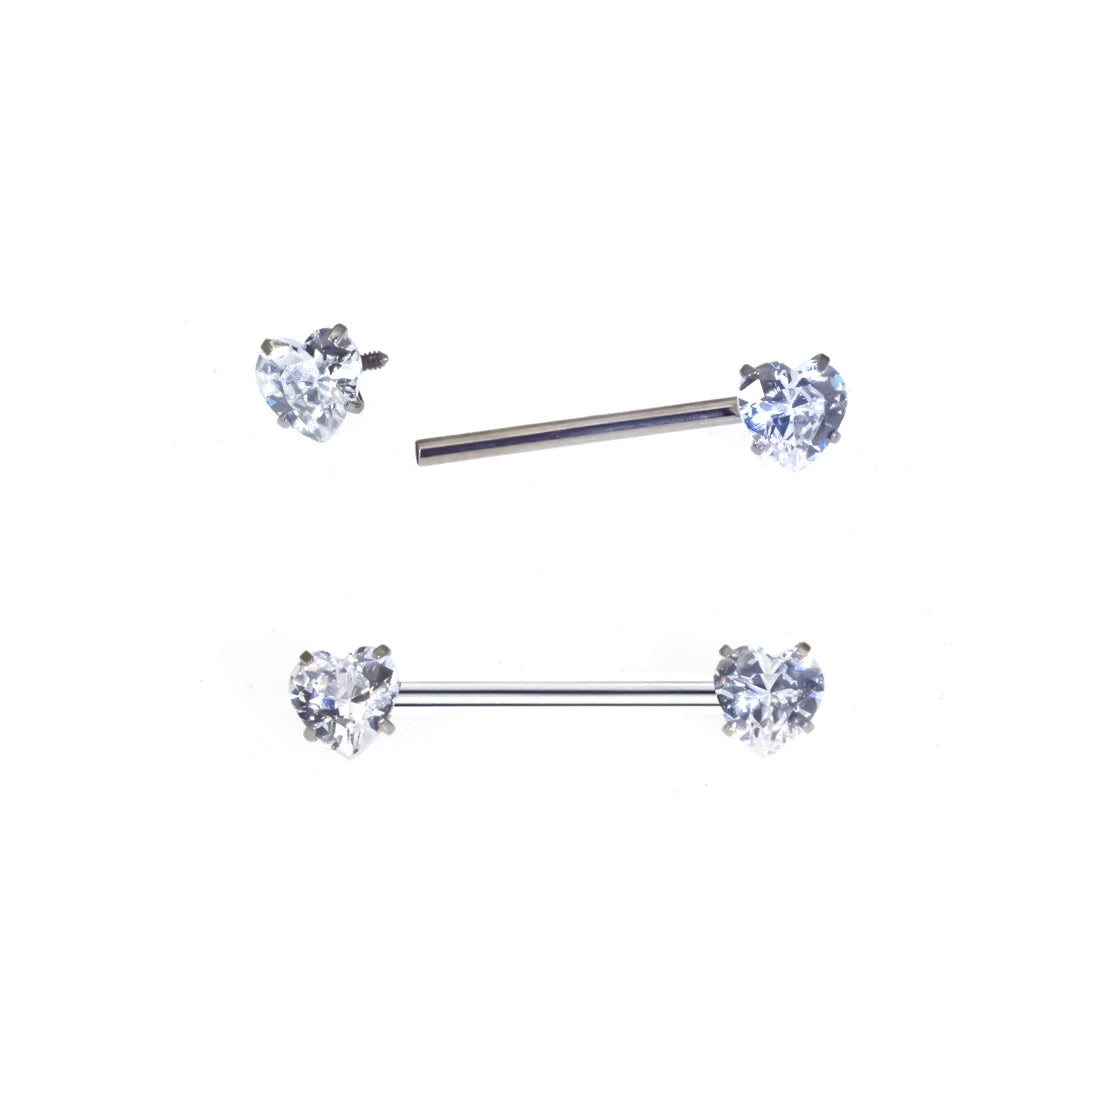 Heart nipple rings with diamonds gold and silver titanium 2 pieces nipple piercing barbells 16G Ashley Piercing Jewelry